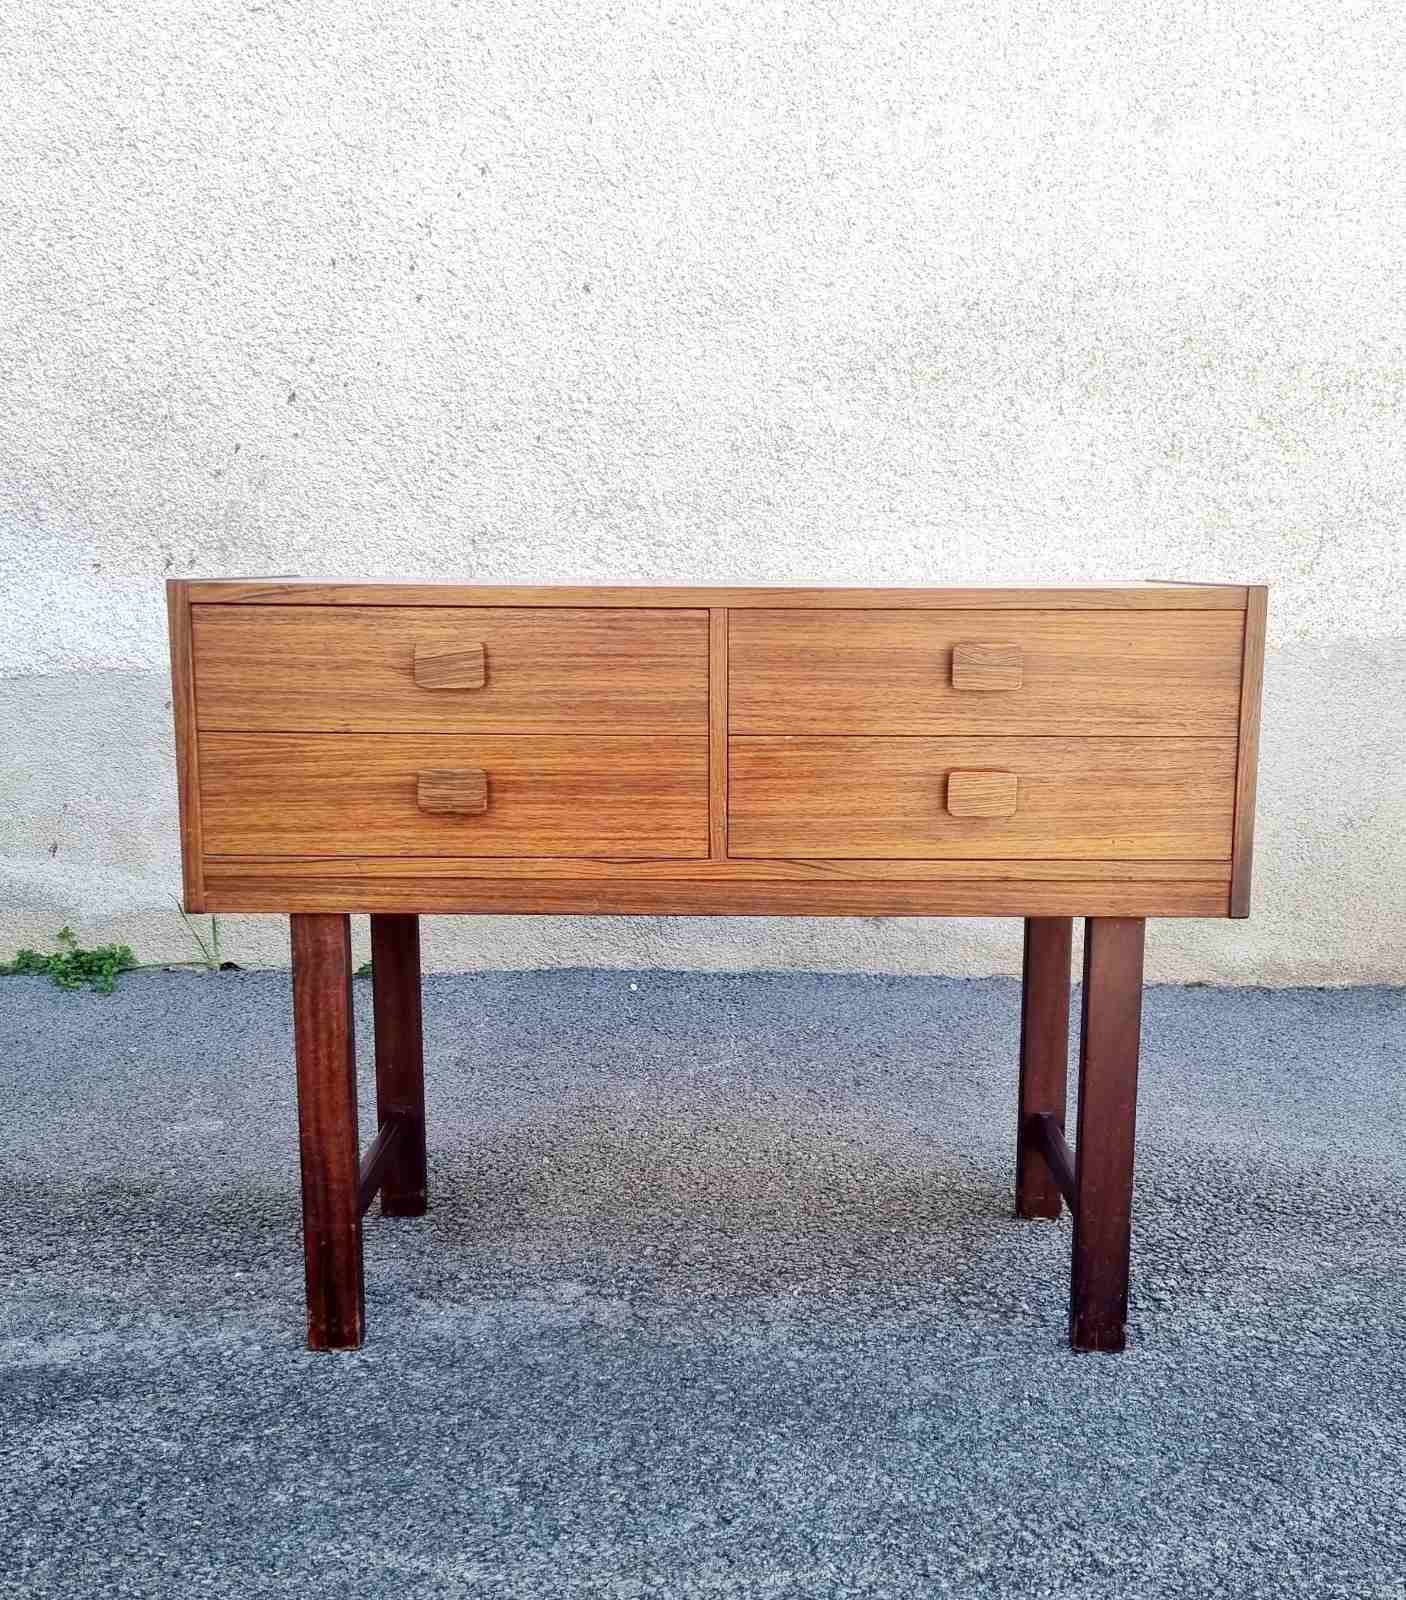 Nice and rare chest of drawers made in the 60s
Classic scandinavian design
Made in Sweden
Very good condition almost perfect